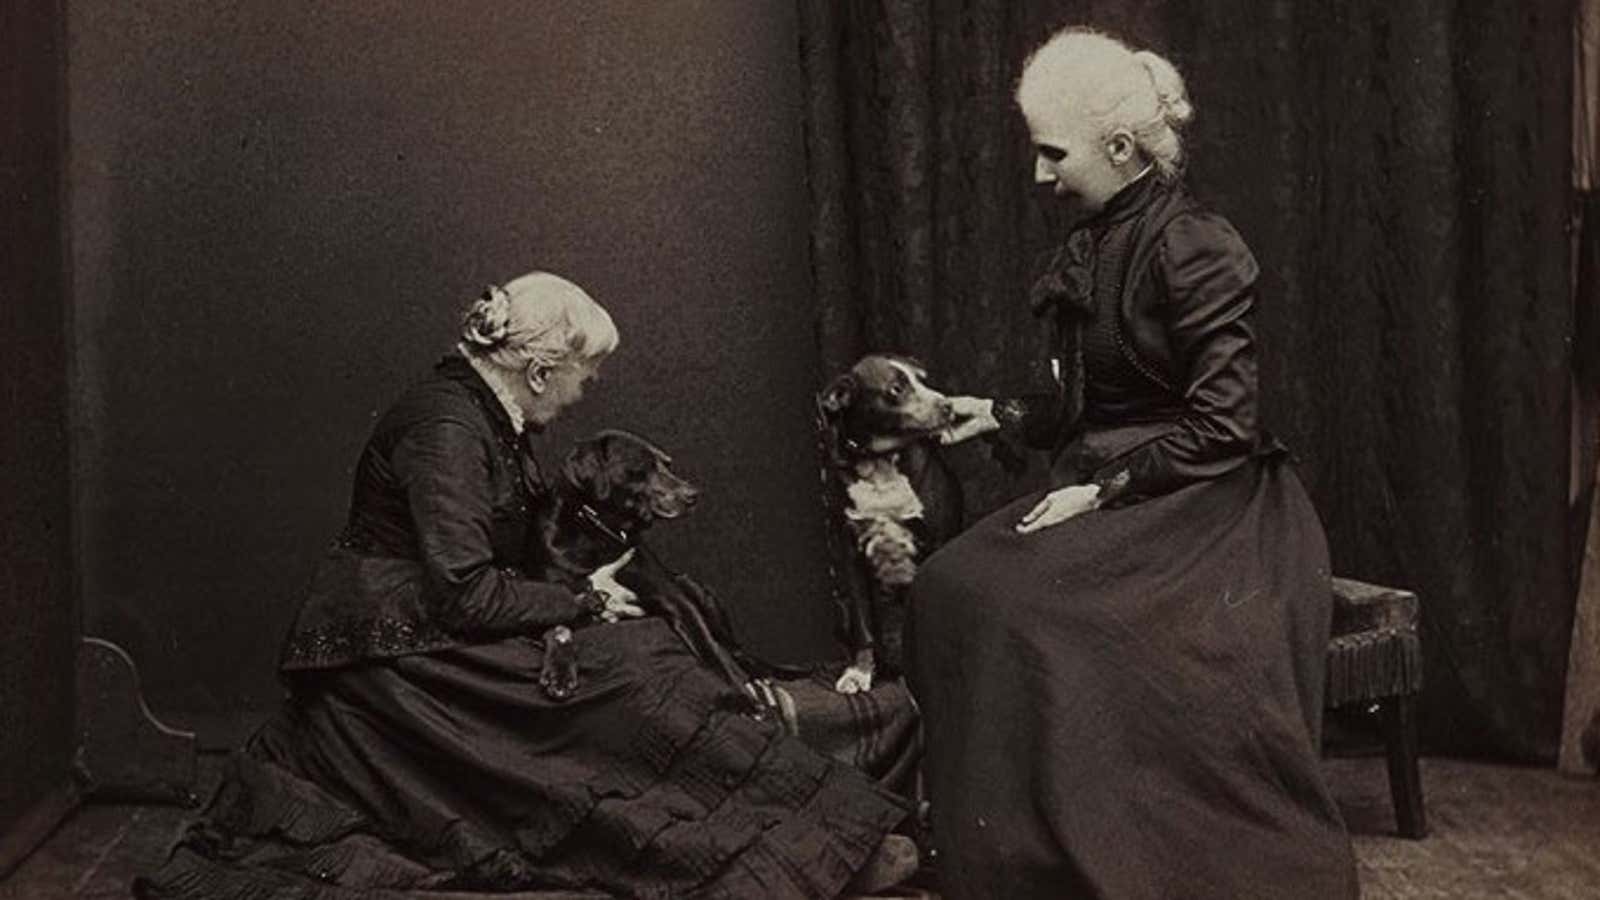 Elizabeth Blackwell, the first woman doctor in the US, with her daughter, Kitty, in 1905.